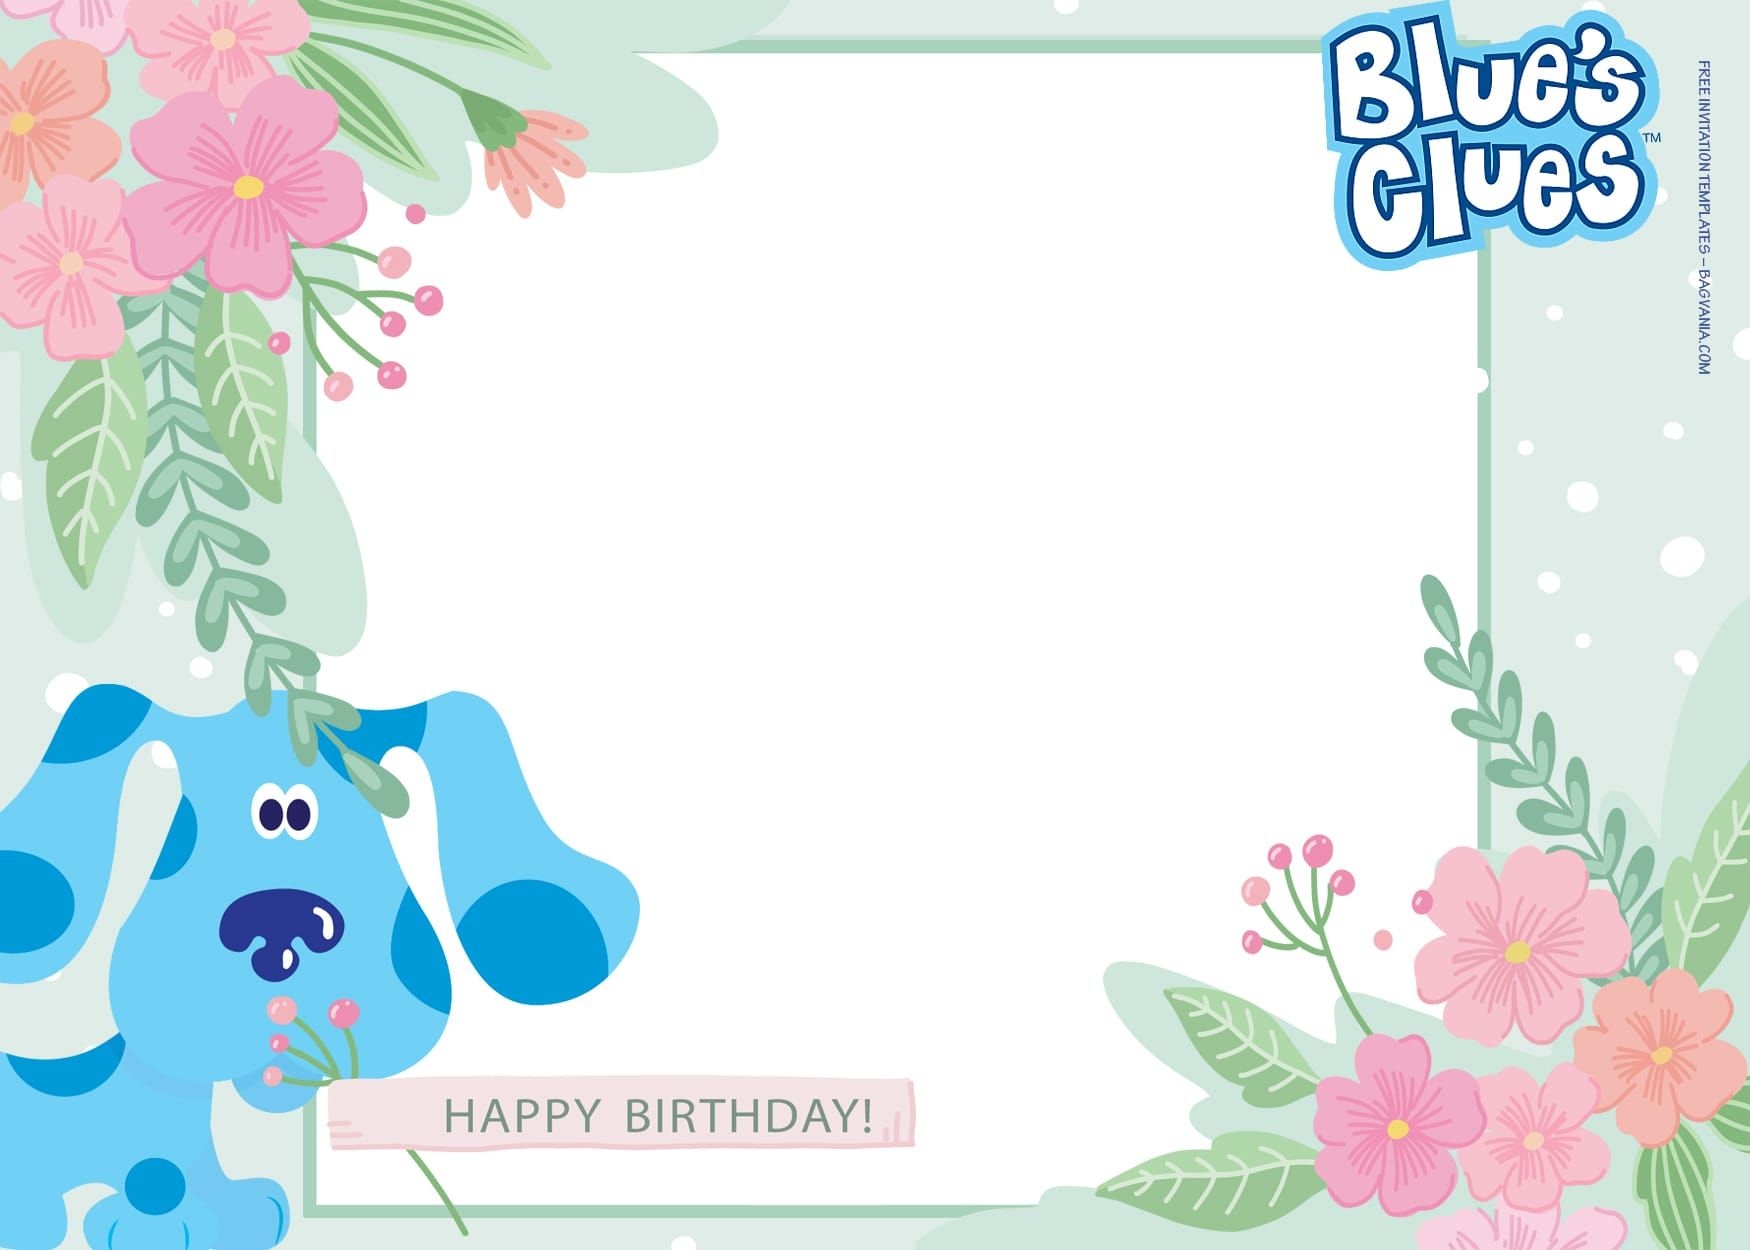 7 Learn And Play With Blues Clues Birthday Invitation Templates Birthday Invitation Templates Birthday Invitations Printable Birthday Invitations